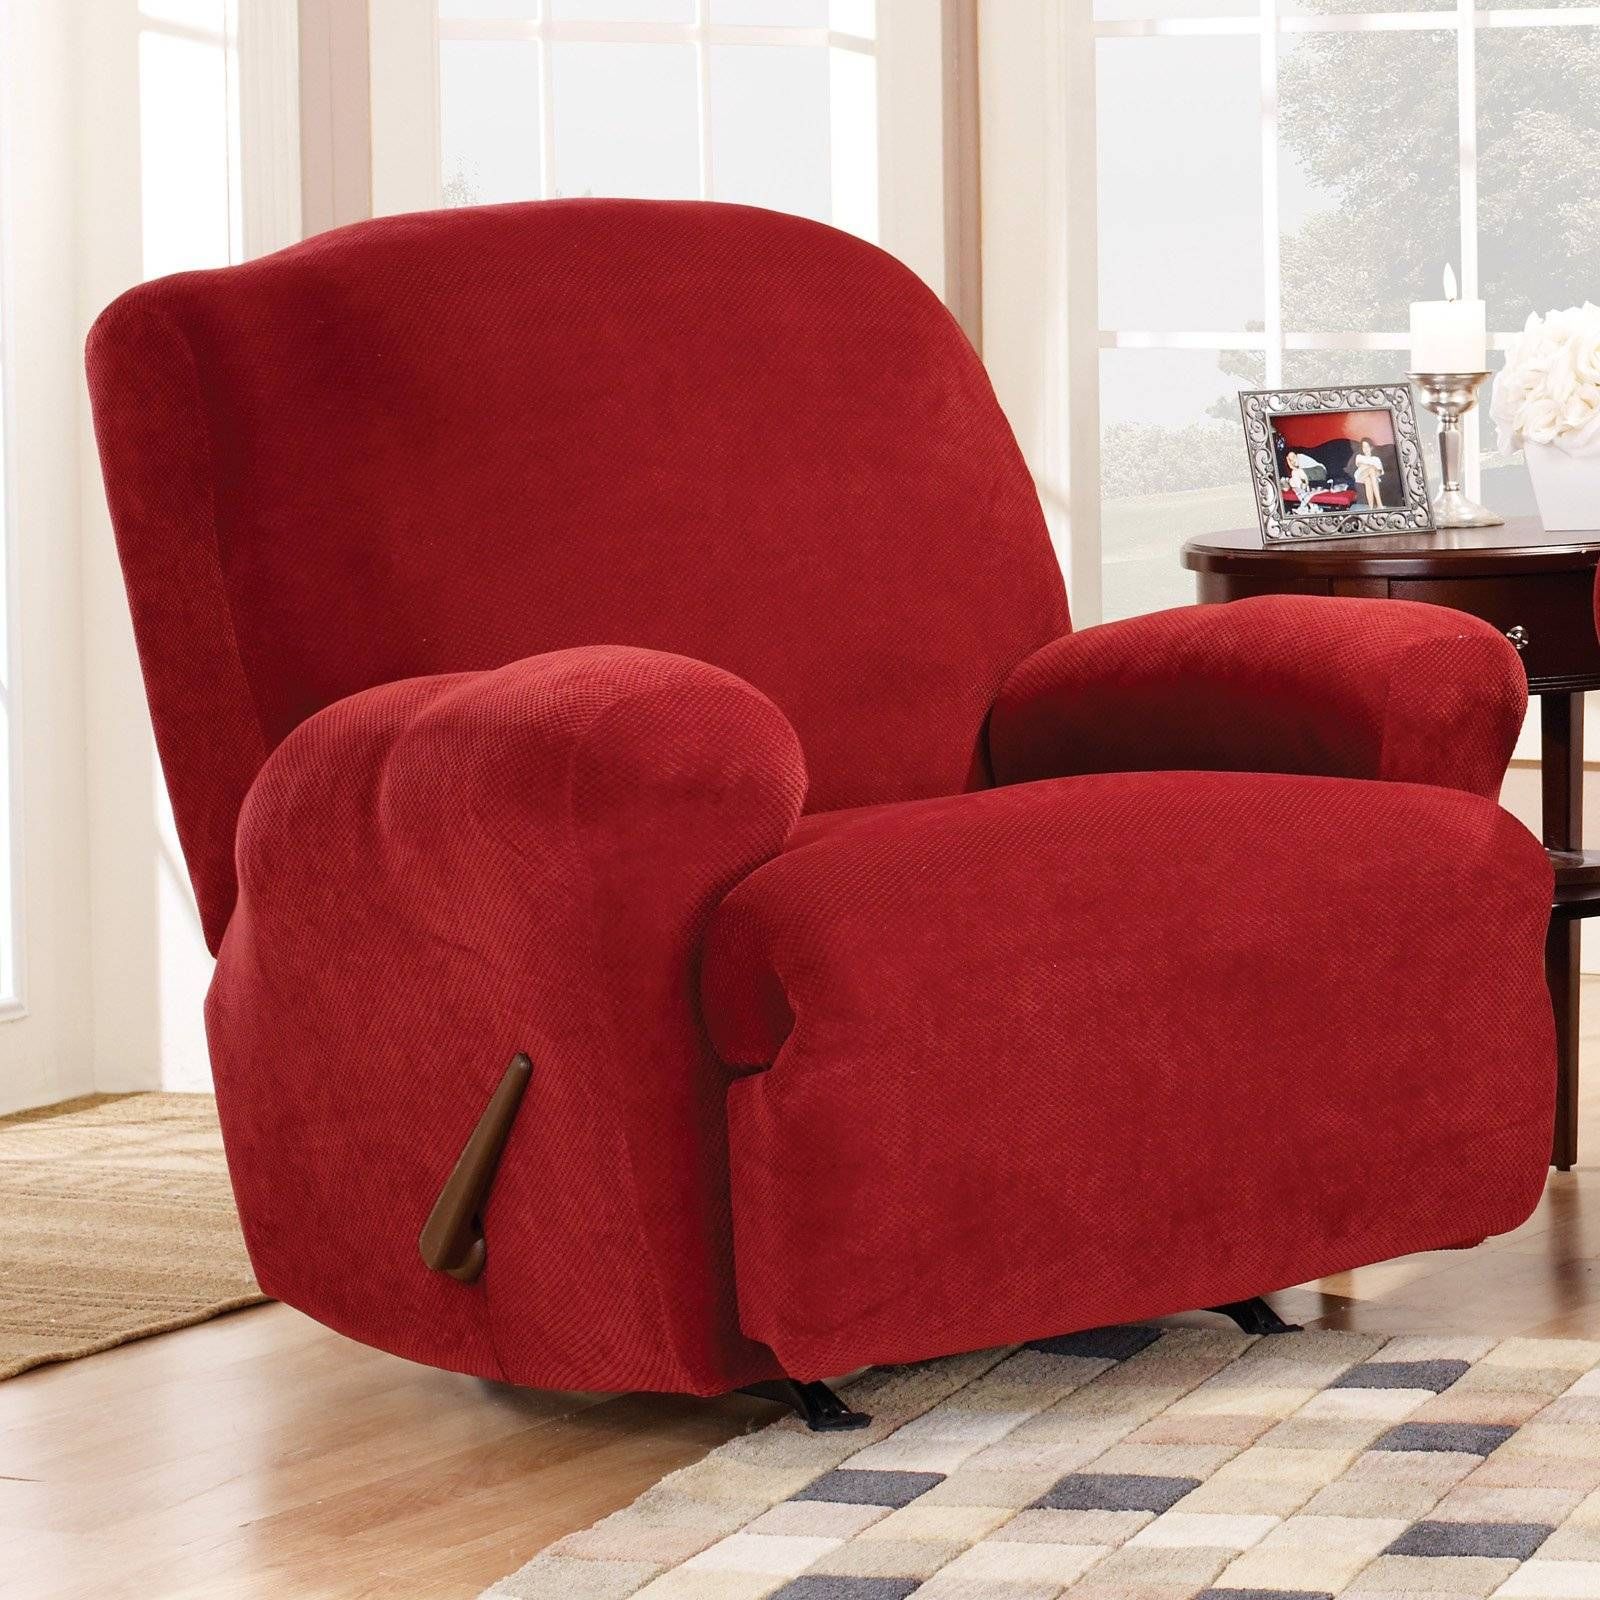 Slipcovers For Reclining Sofas And Loveseats | Centerfieldbar For Slipcover For Reclining Sofas (View 14 of 15)